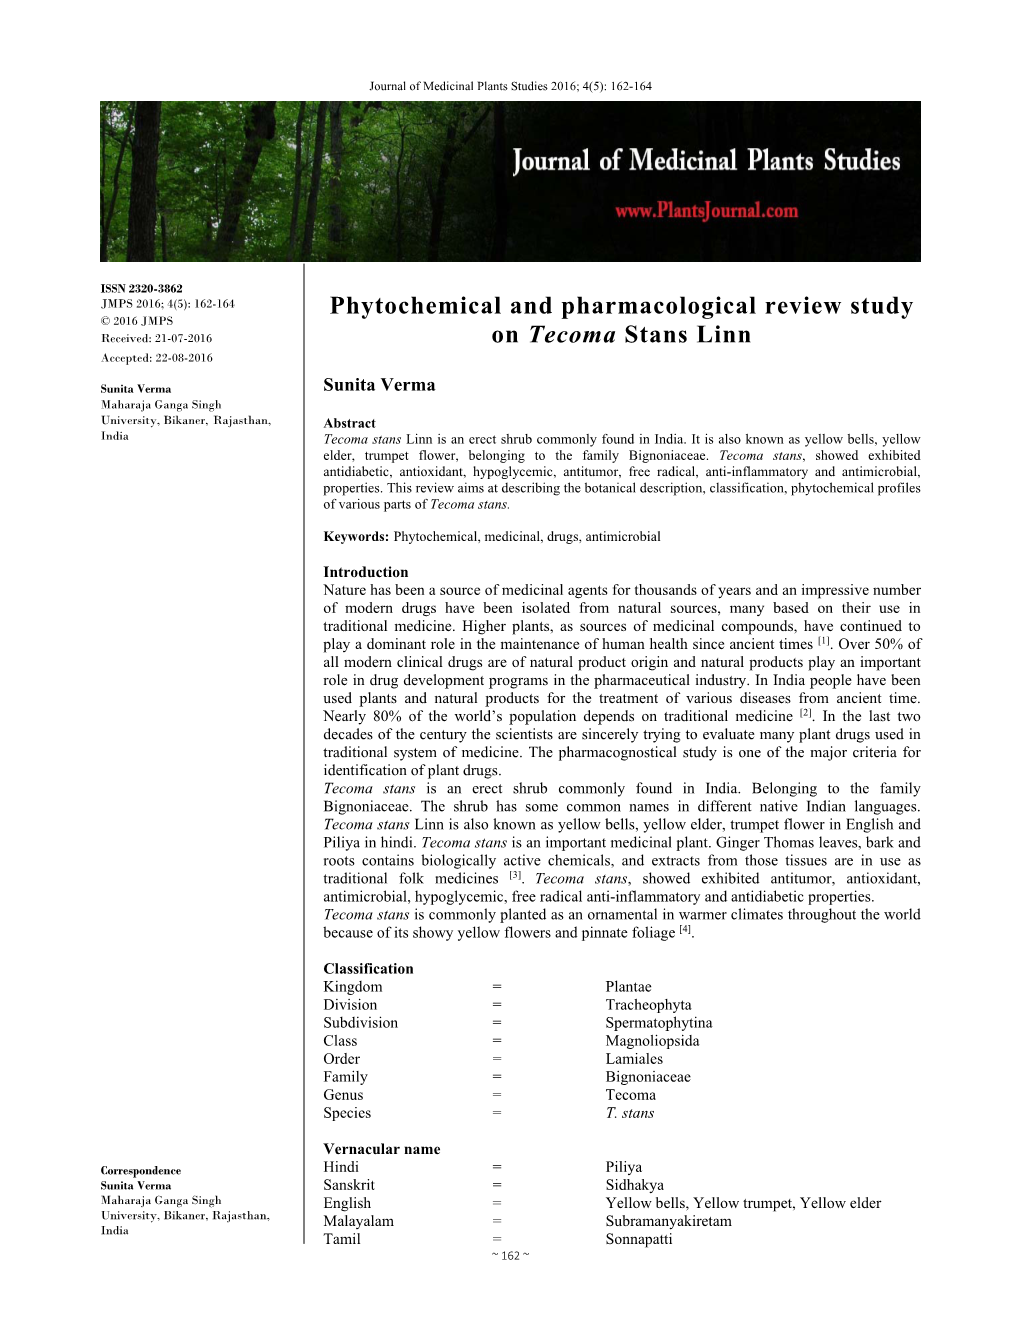 Phytochemical and Pharmacological Review Study on Tecoma Stans Linn